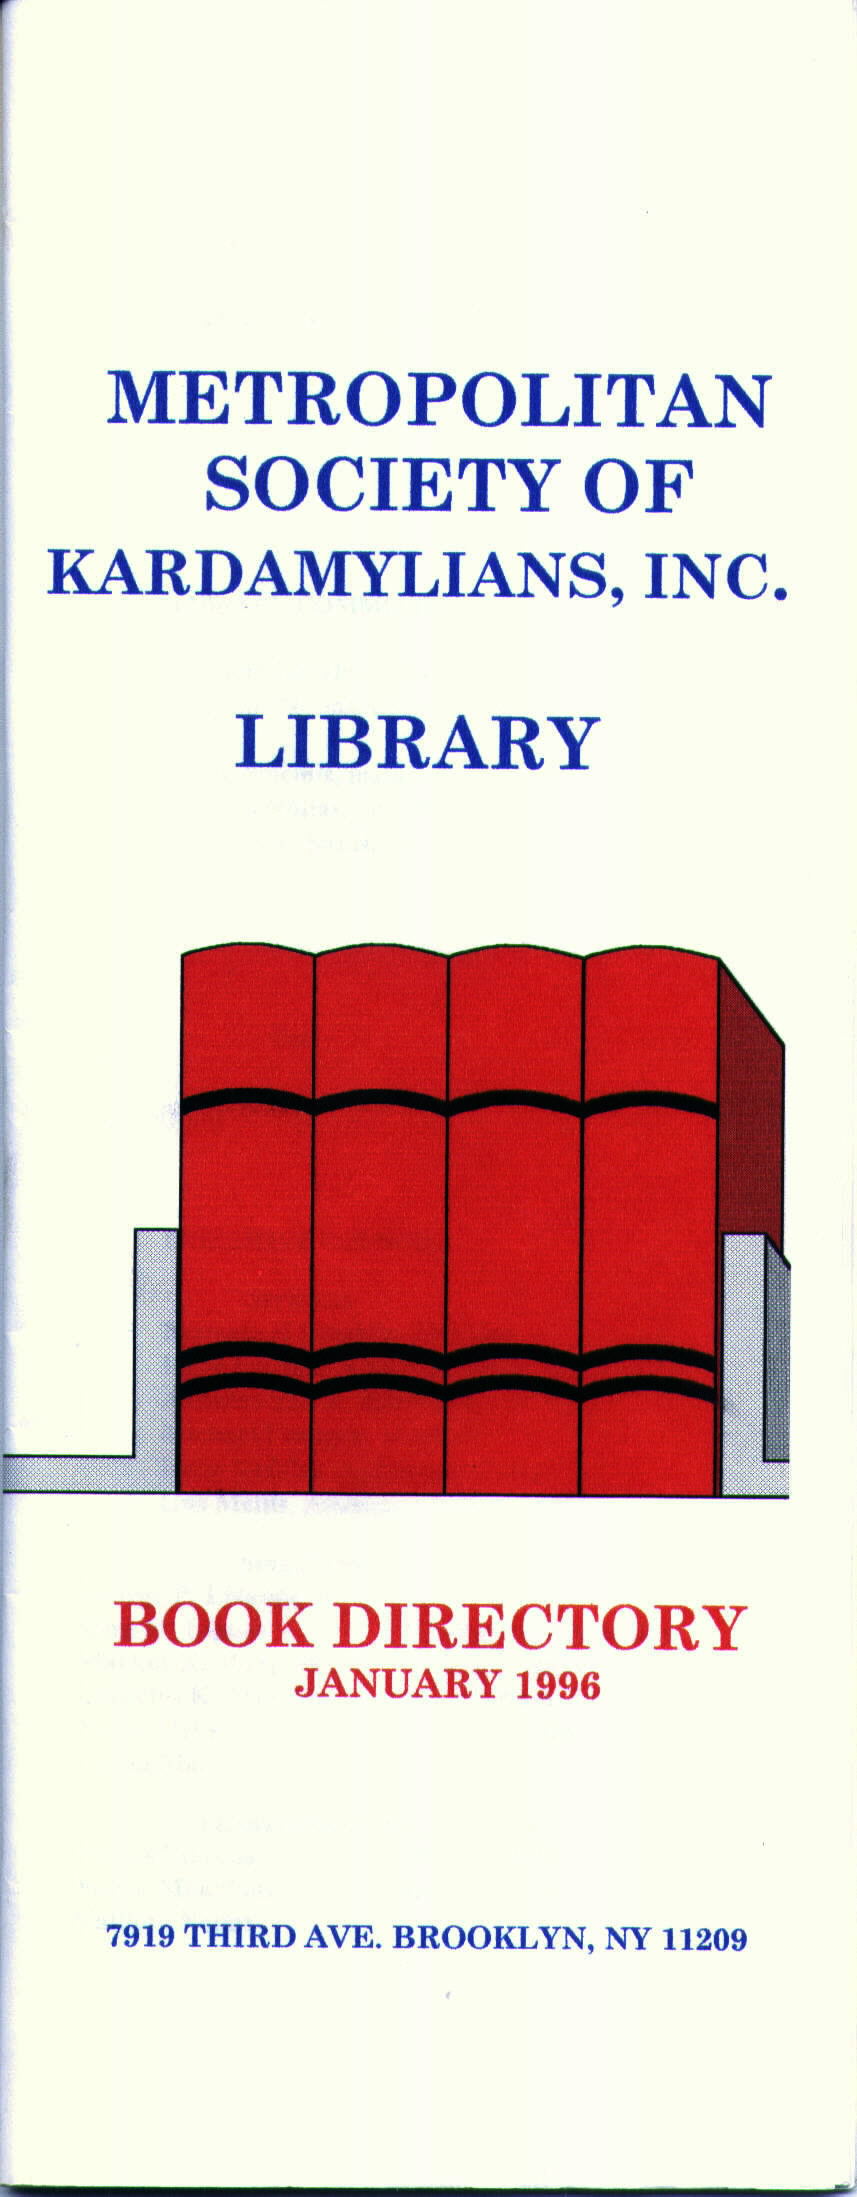 Library Directory